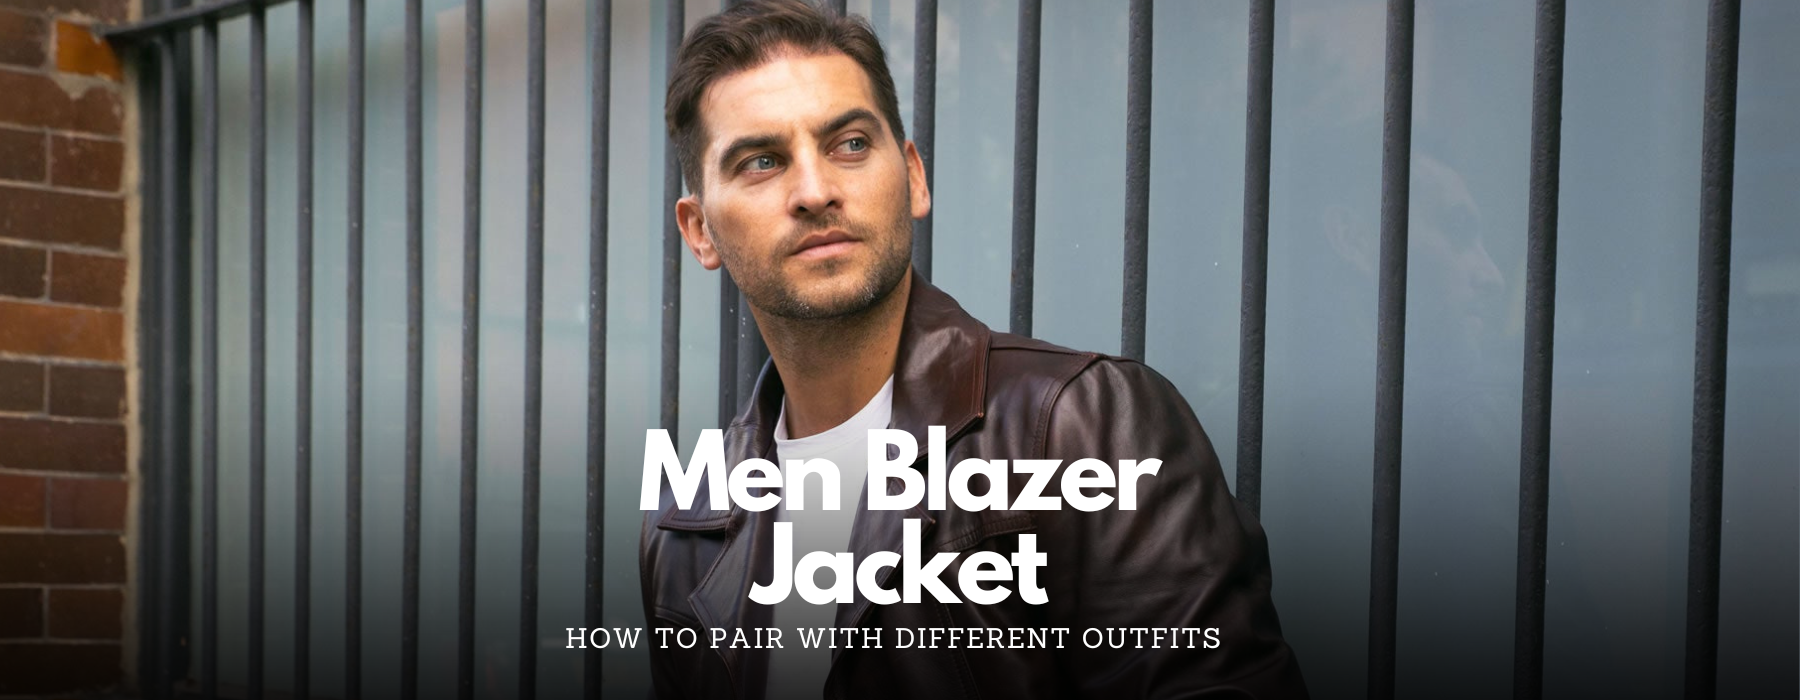 How to Pair Men's Blazer Jackets with Different Outfits